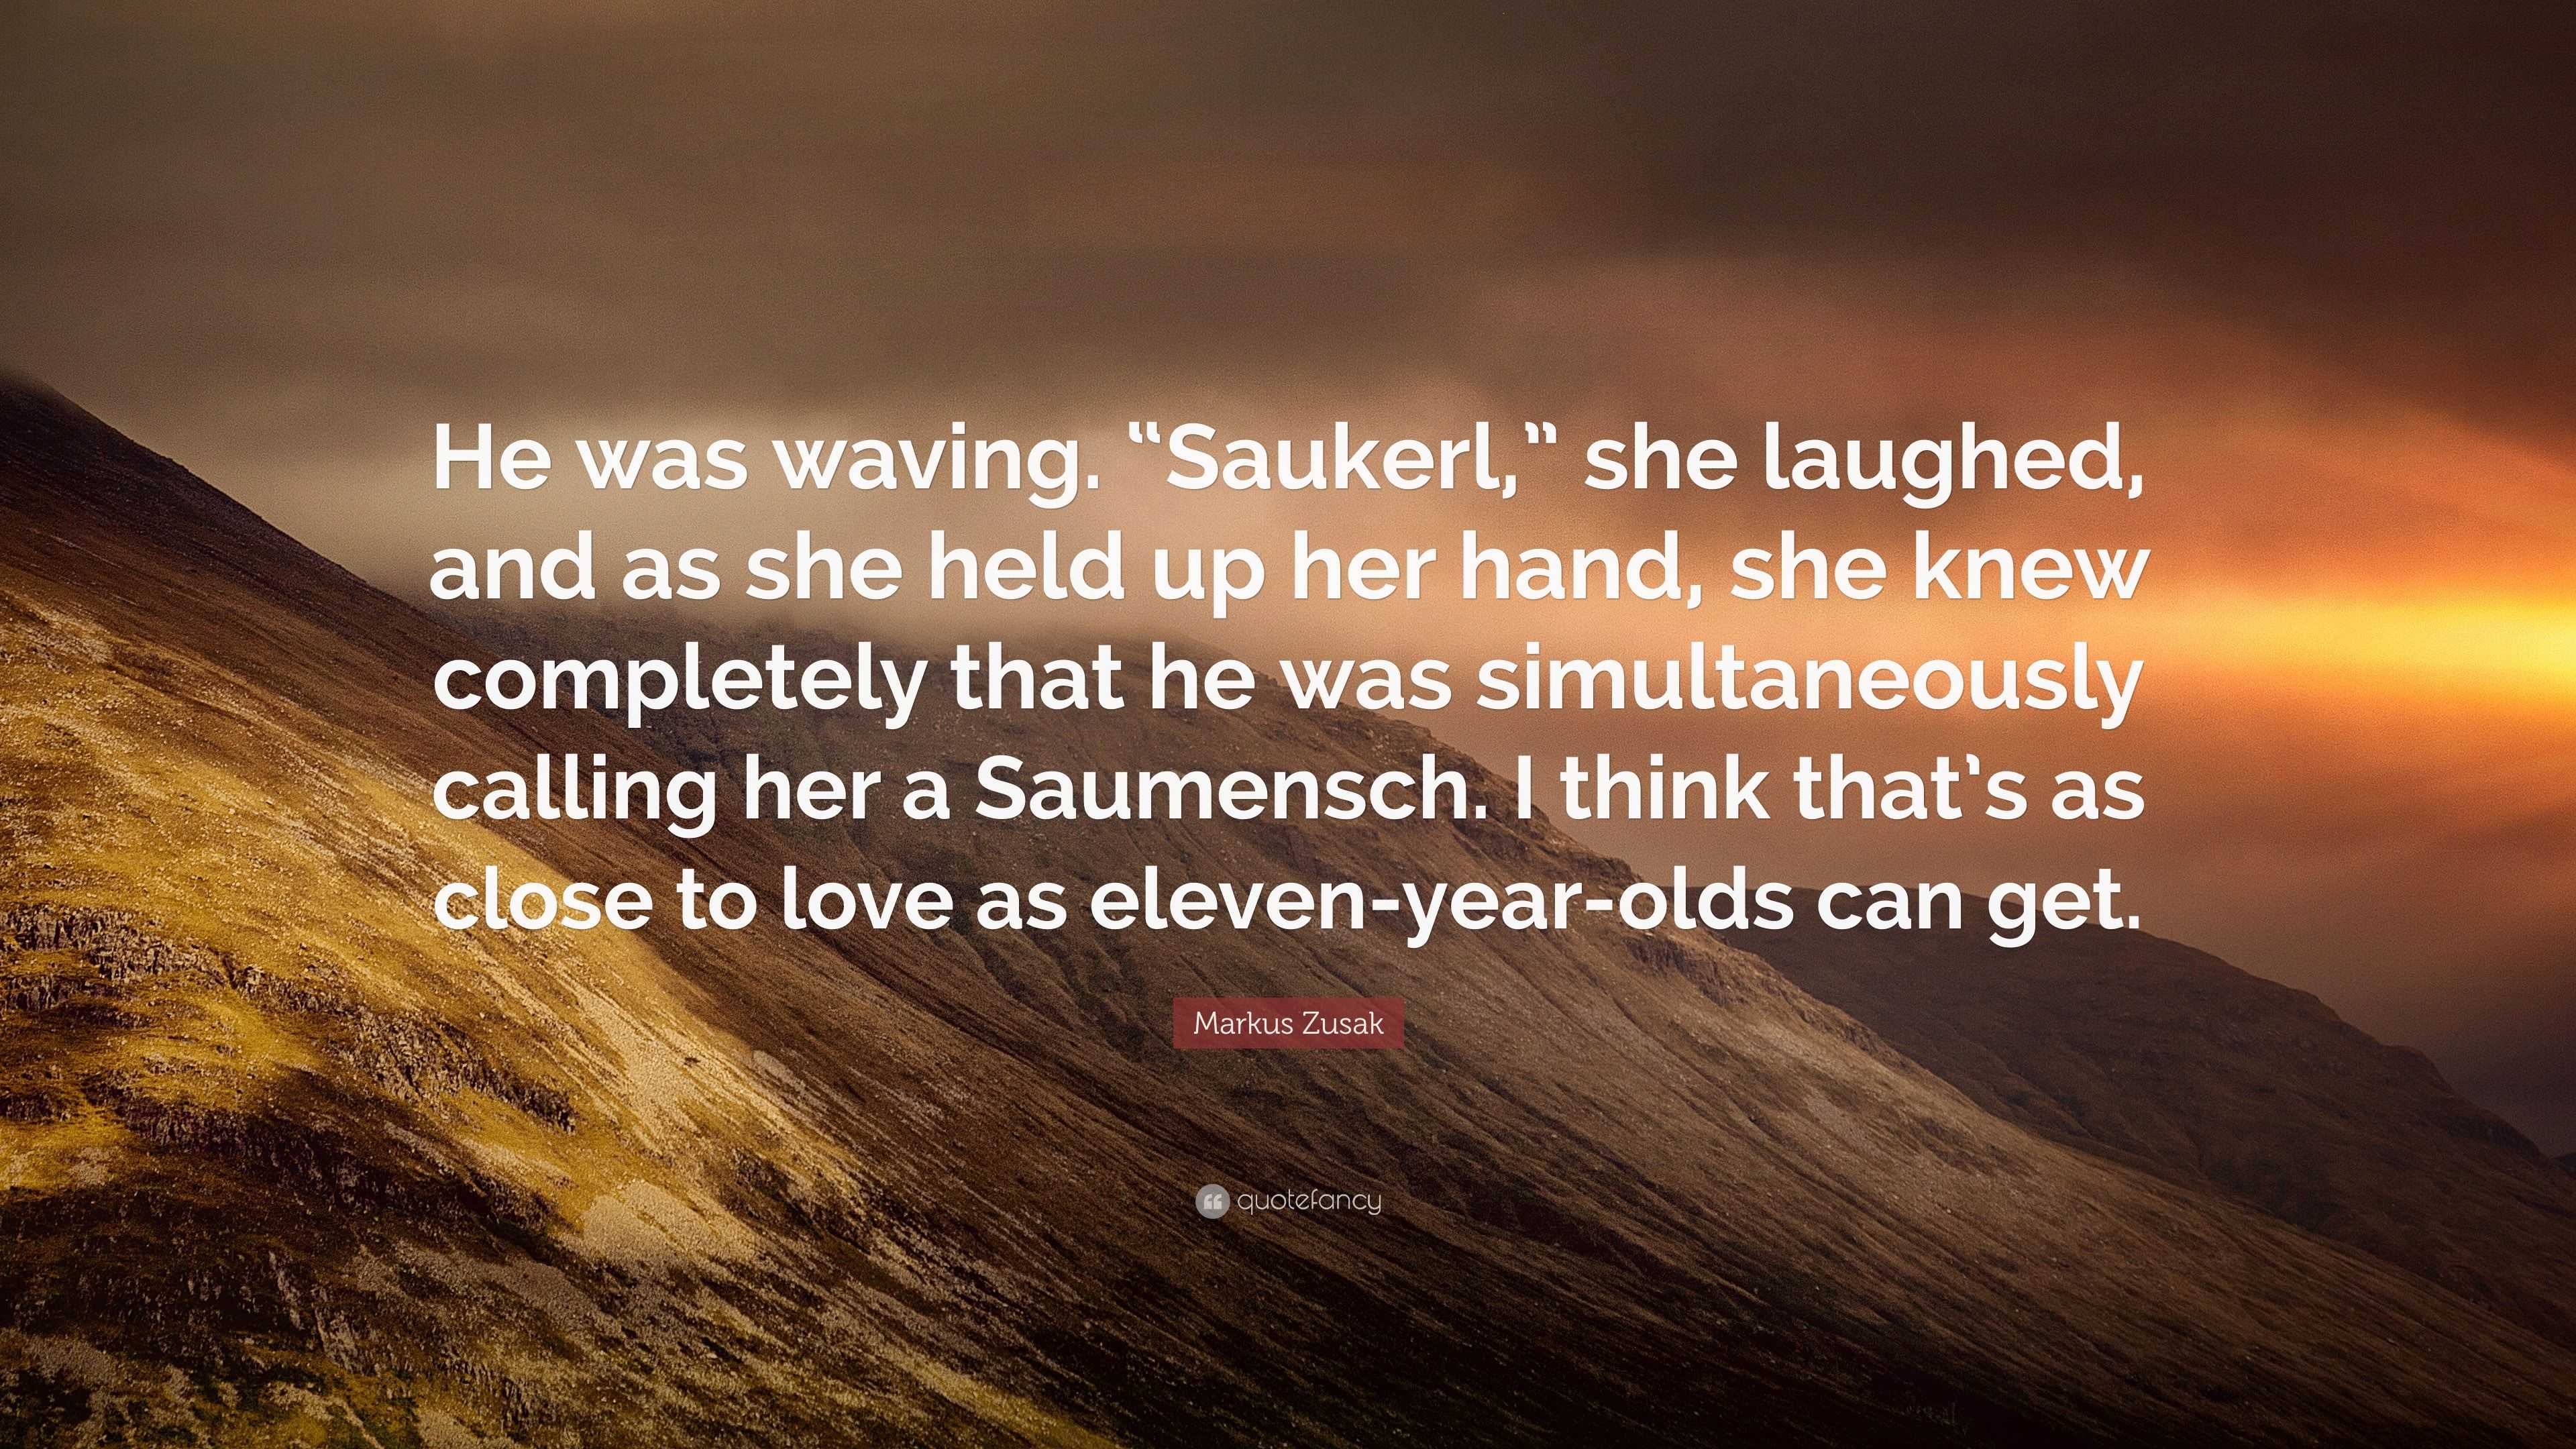 Markus Zusak Quote: “He was waving. “Saukerl,” she laughed, and as she ...